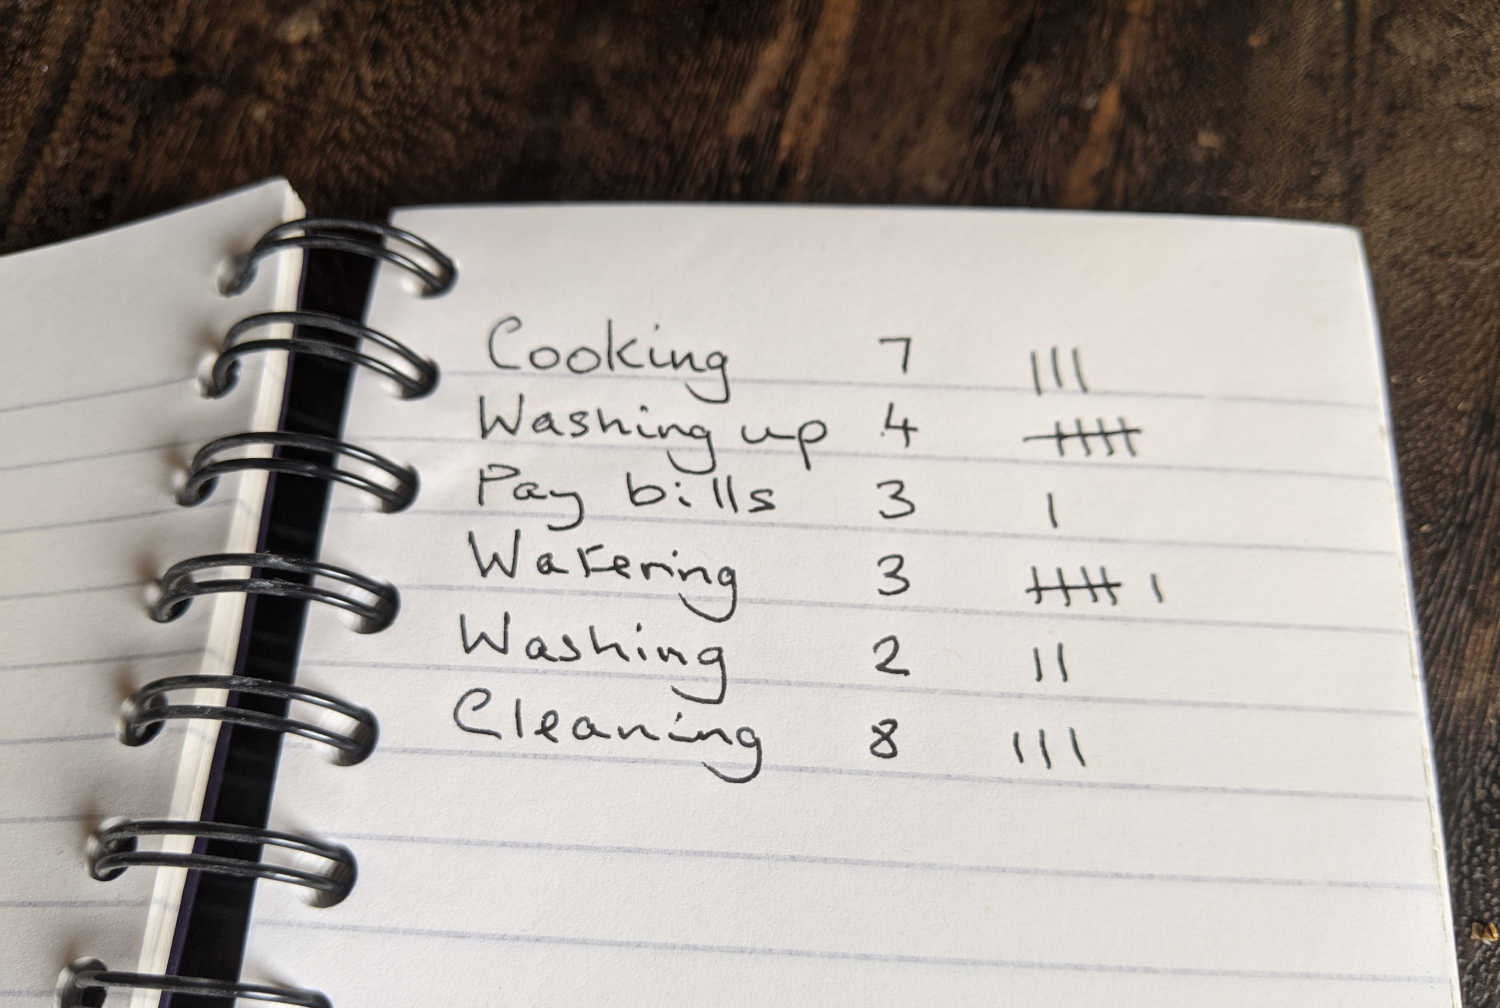 Avoid Making Lists and Keeping Score in Your Relationships